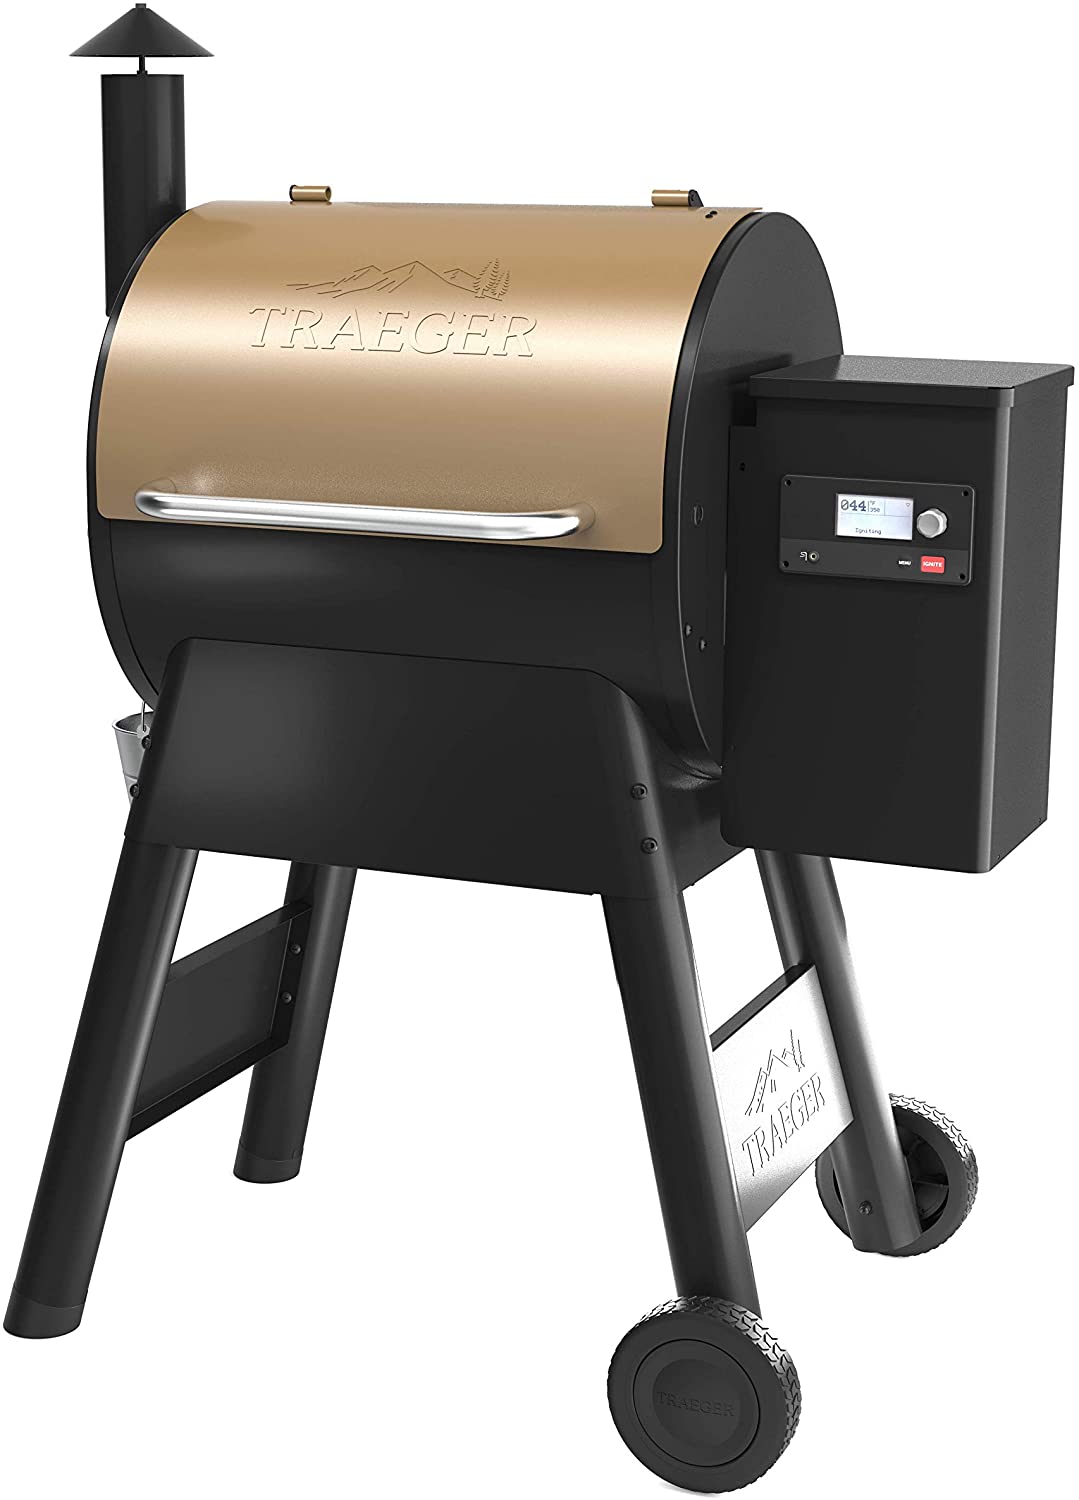 Pros And Cons Of Using Traeger Pro 575 Pellet Grill